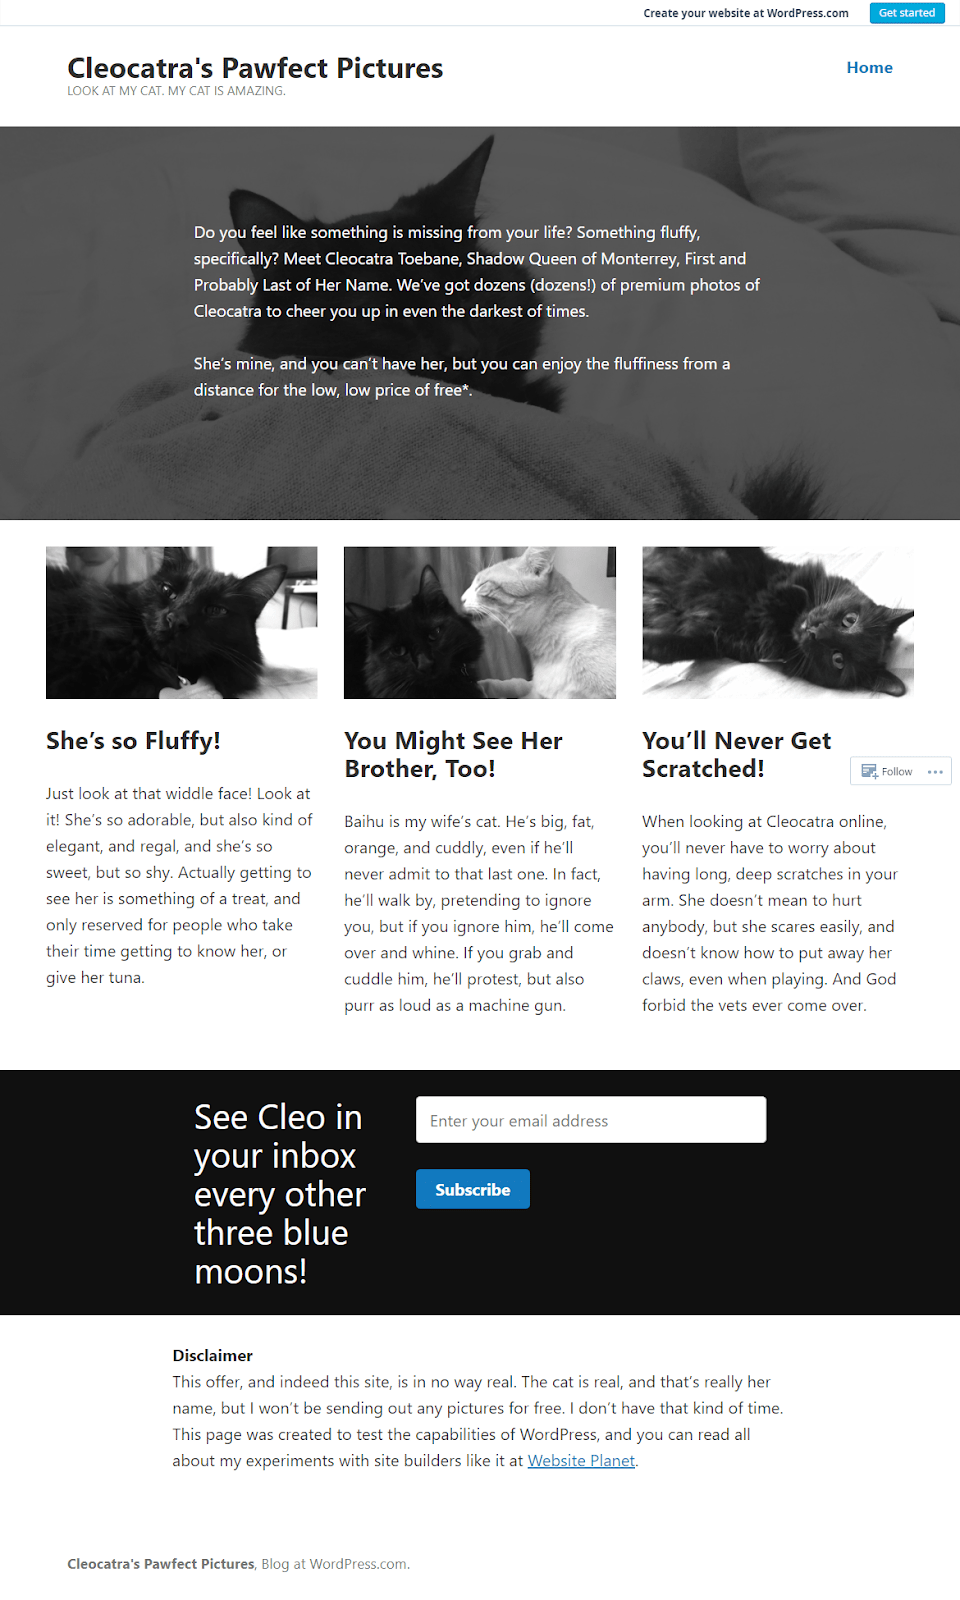 The final home page on WordPress, with all content copied in.